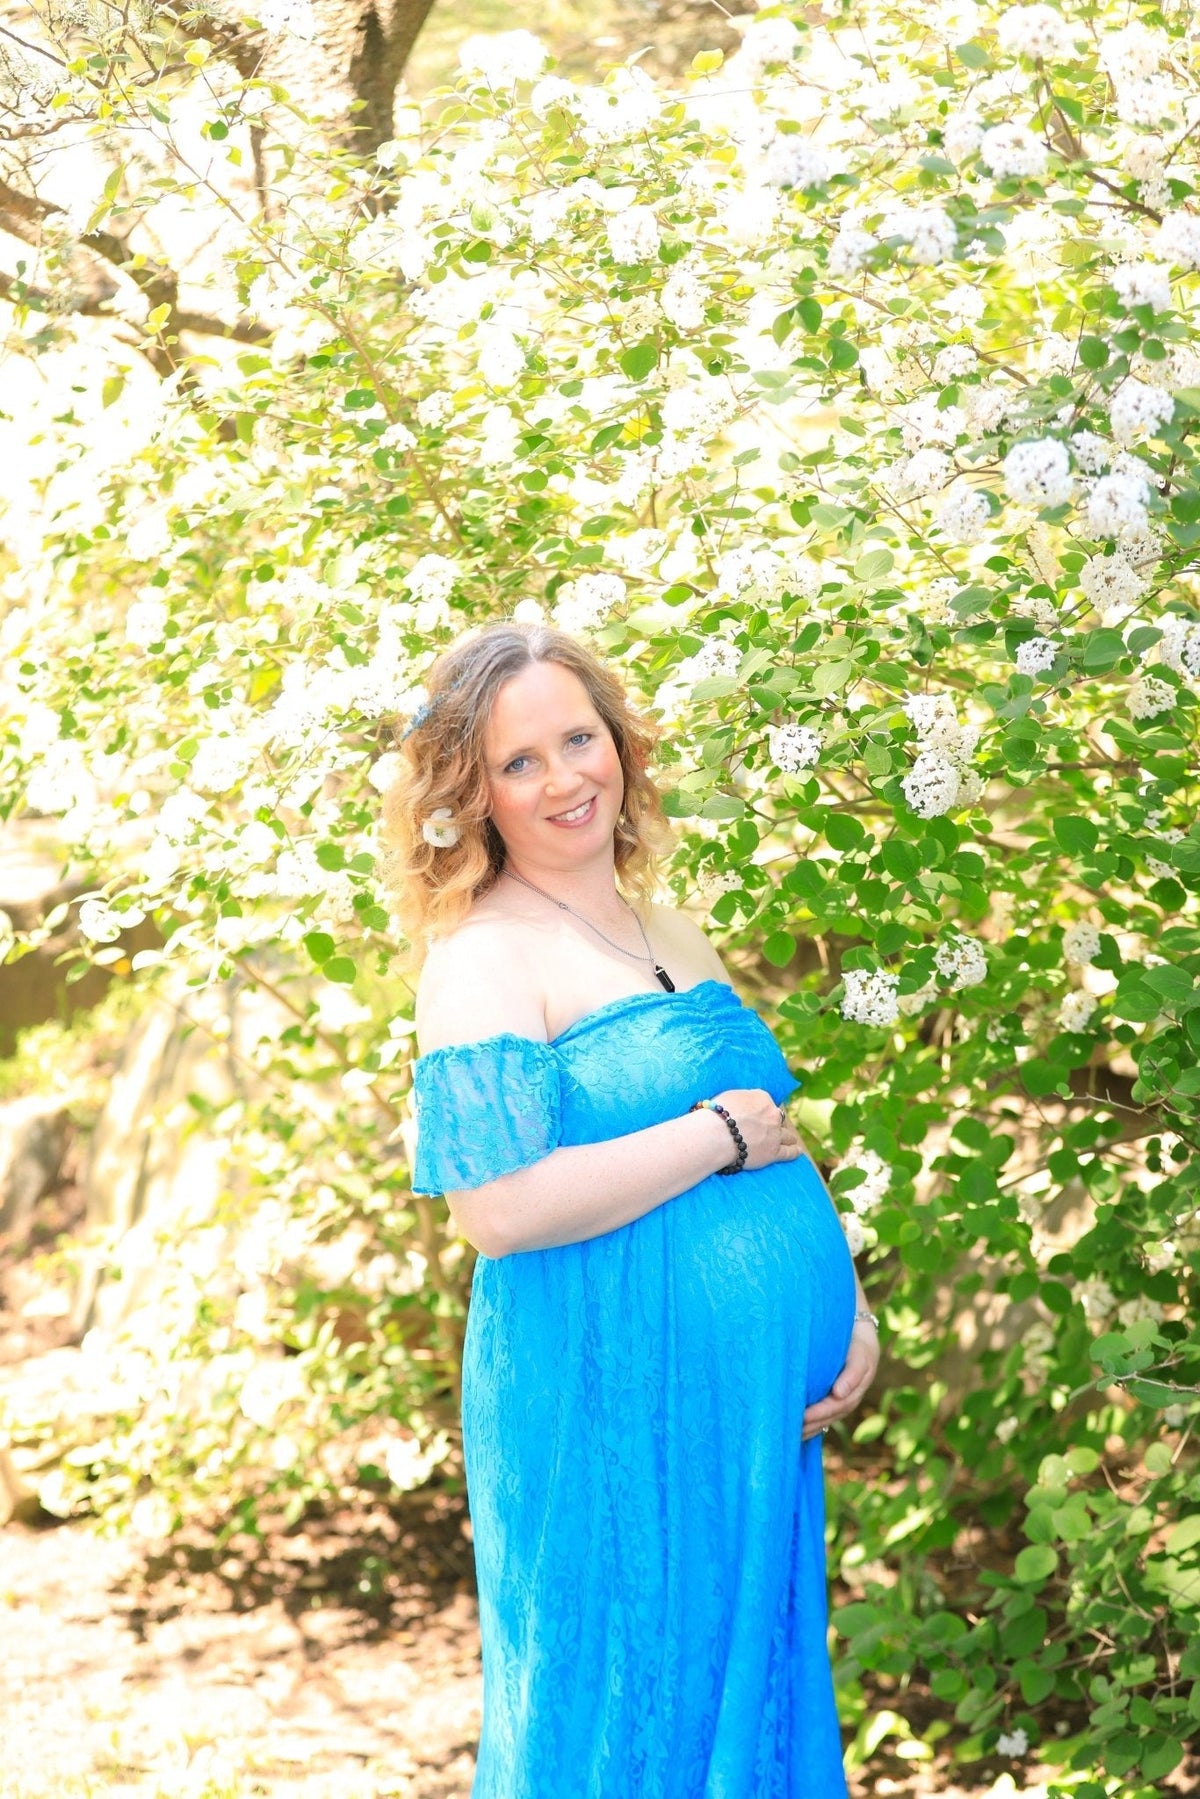 Maternity Session with Ocean or Park Backdrop Bill McKim Photography -Jersey Shore whale watch tours 